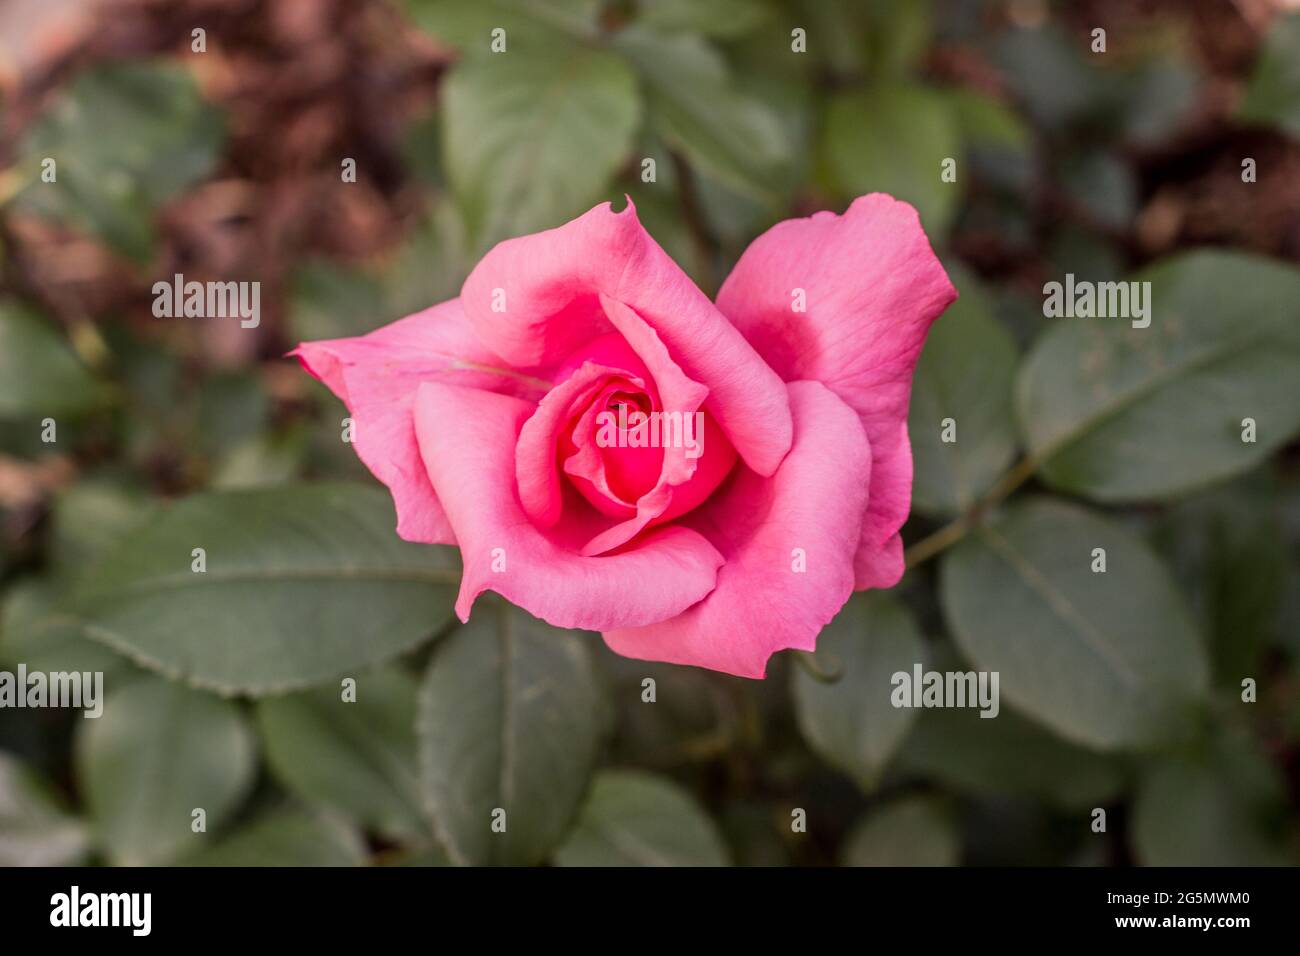 Beautiful pink rose with leaves in the garden Stock Photo